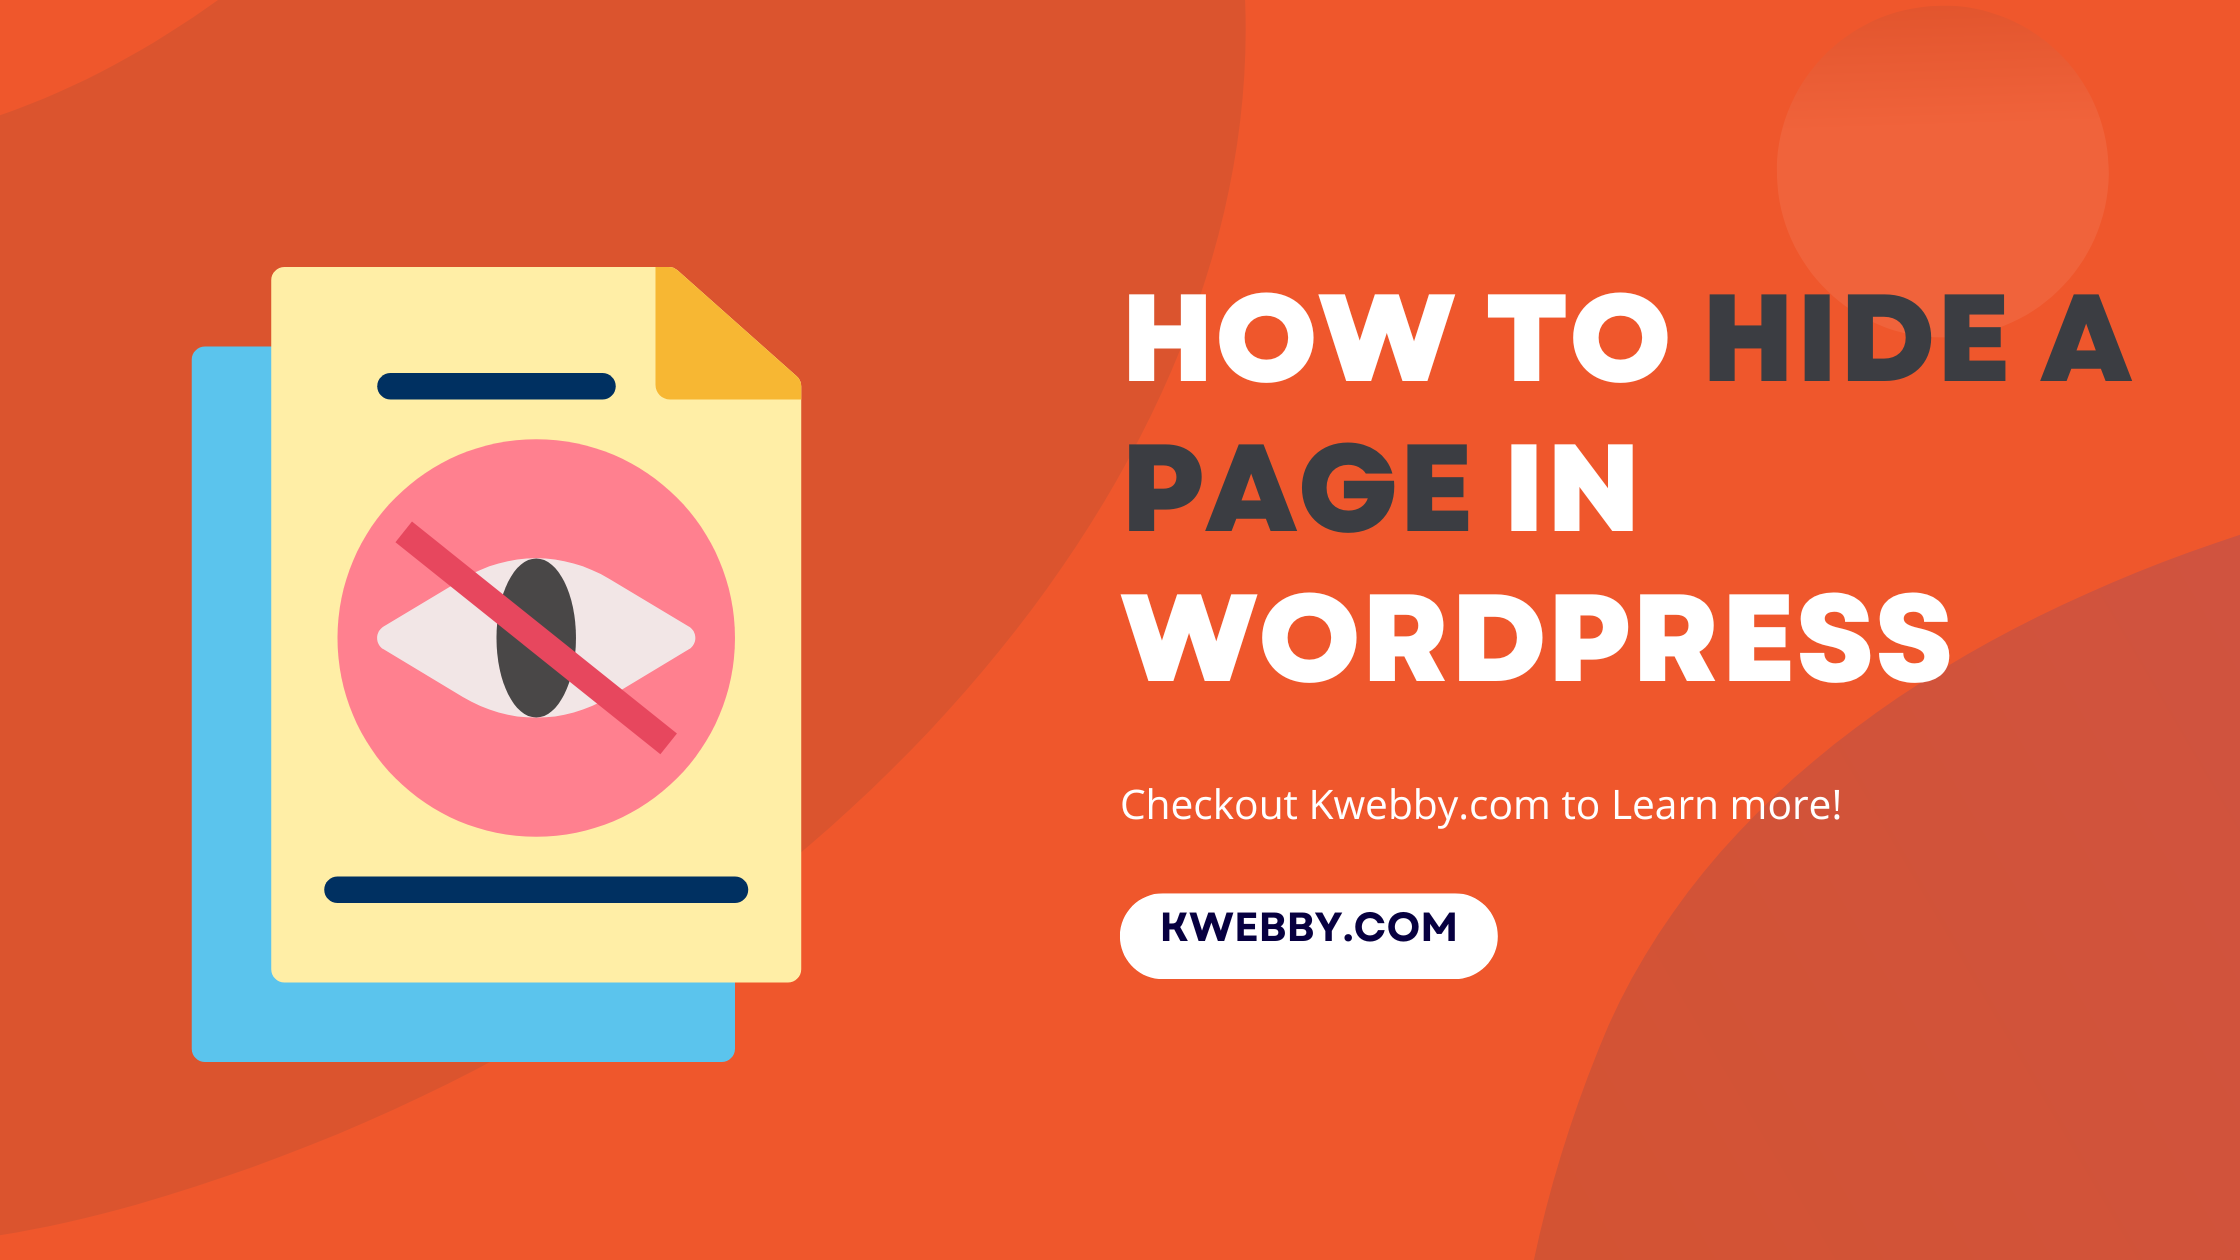 How to hide a page in WordPress?